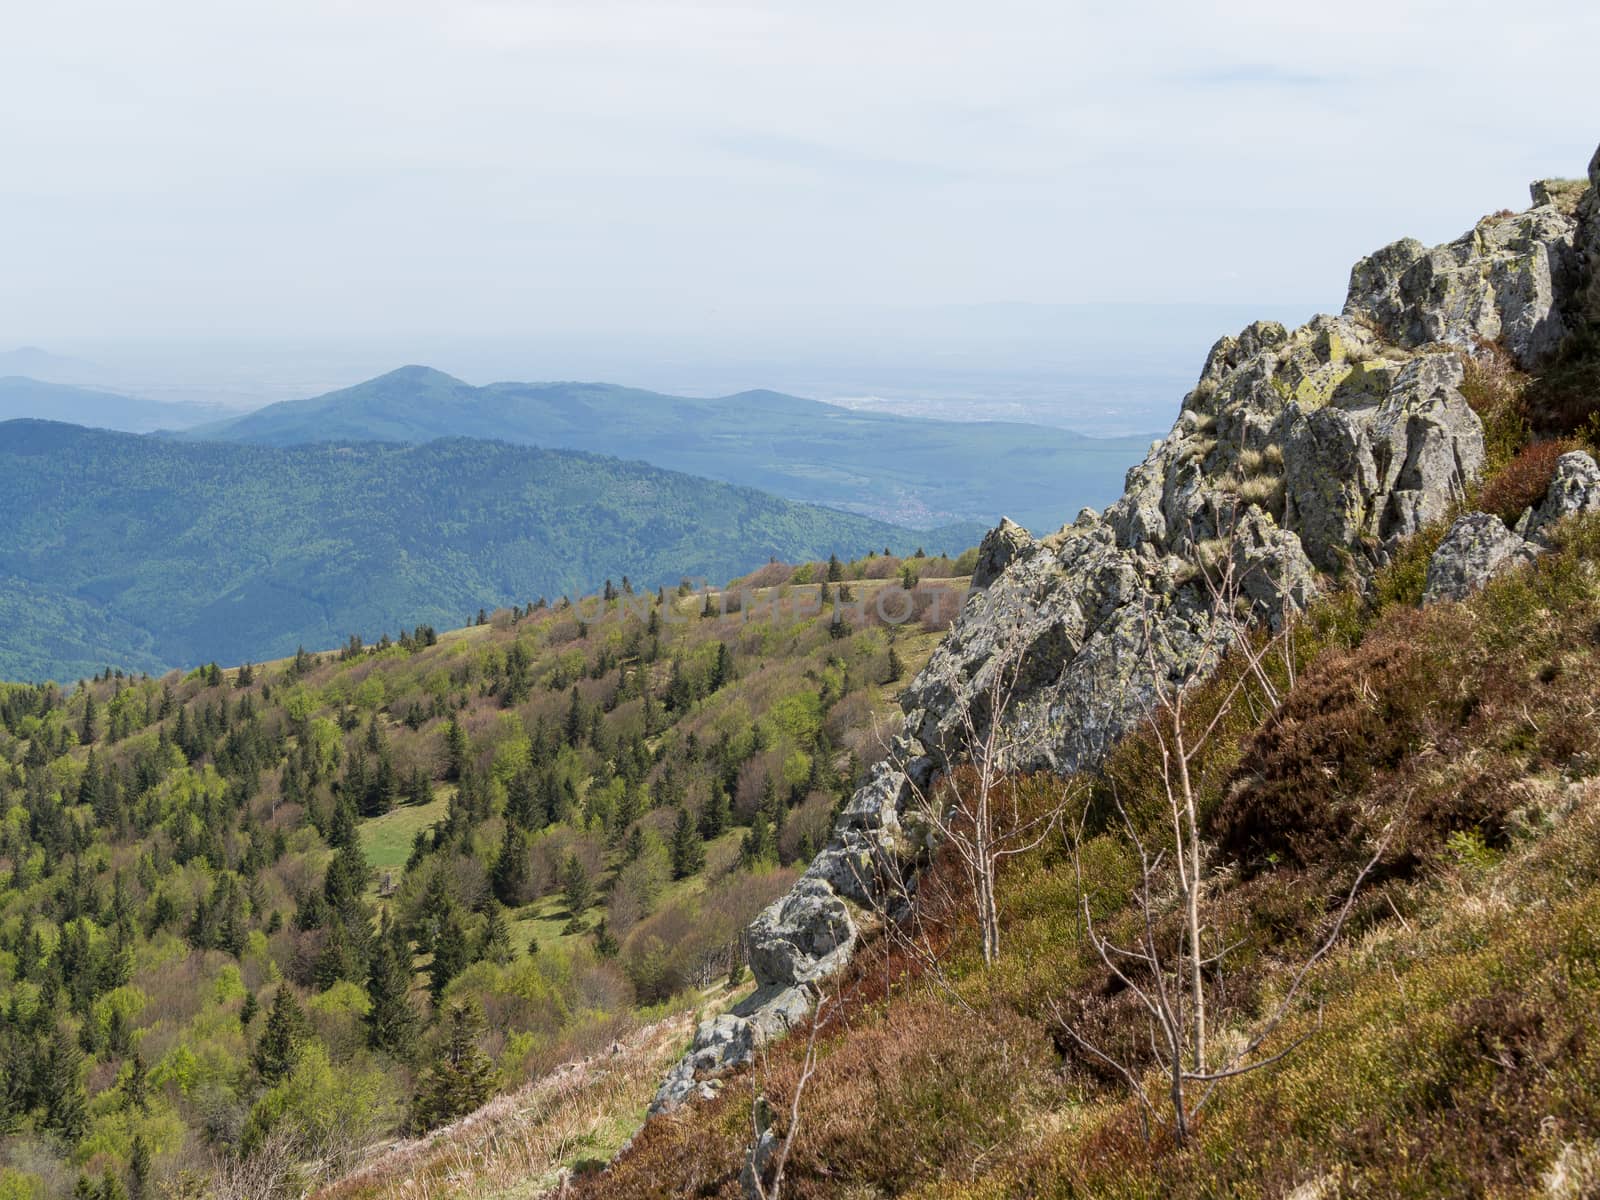 Looking past a cliff edge at the Vosges hills in France